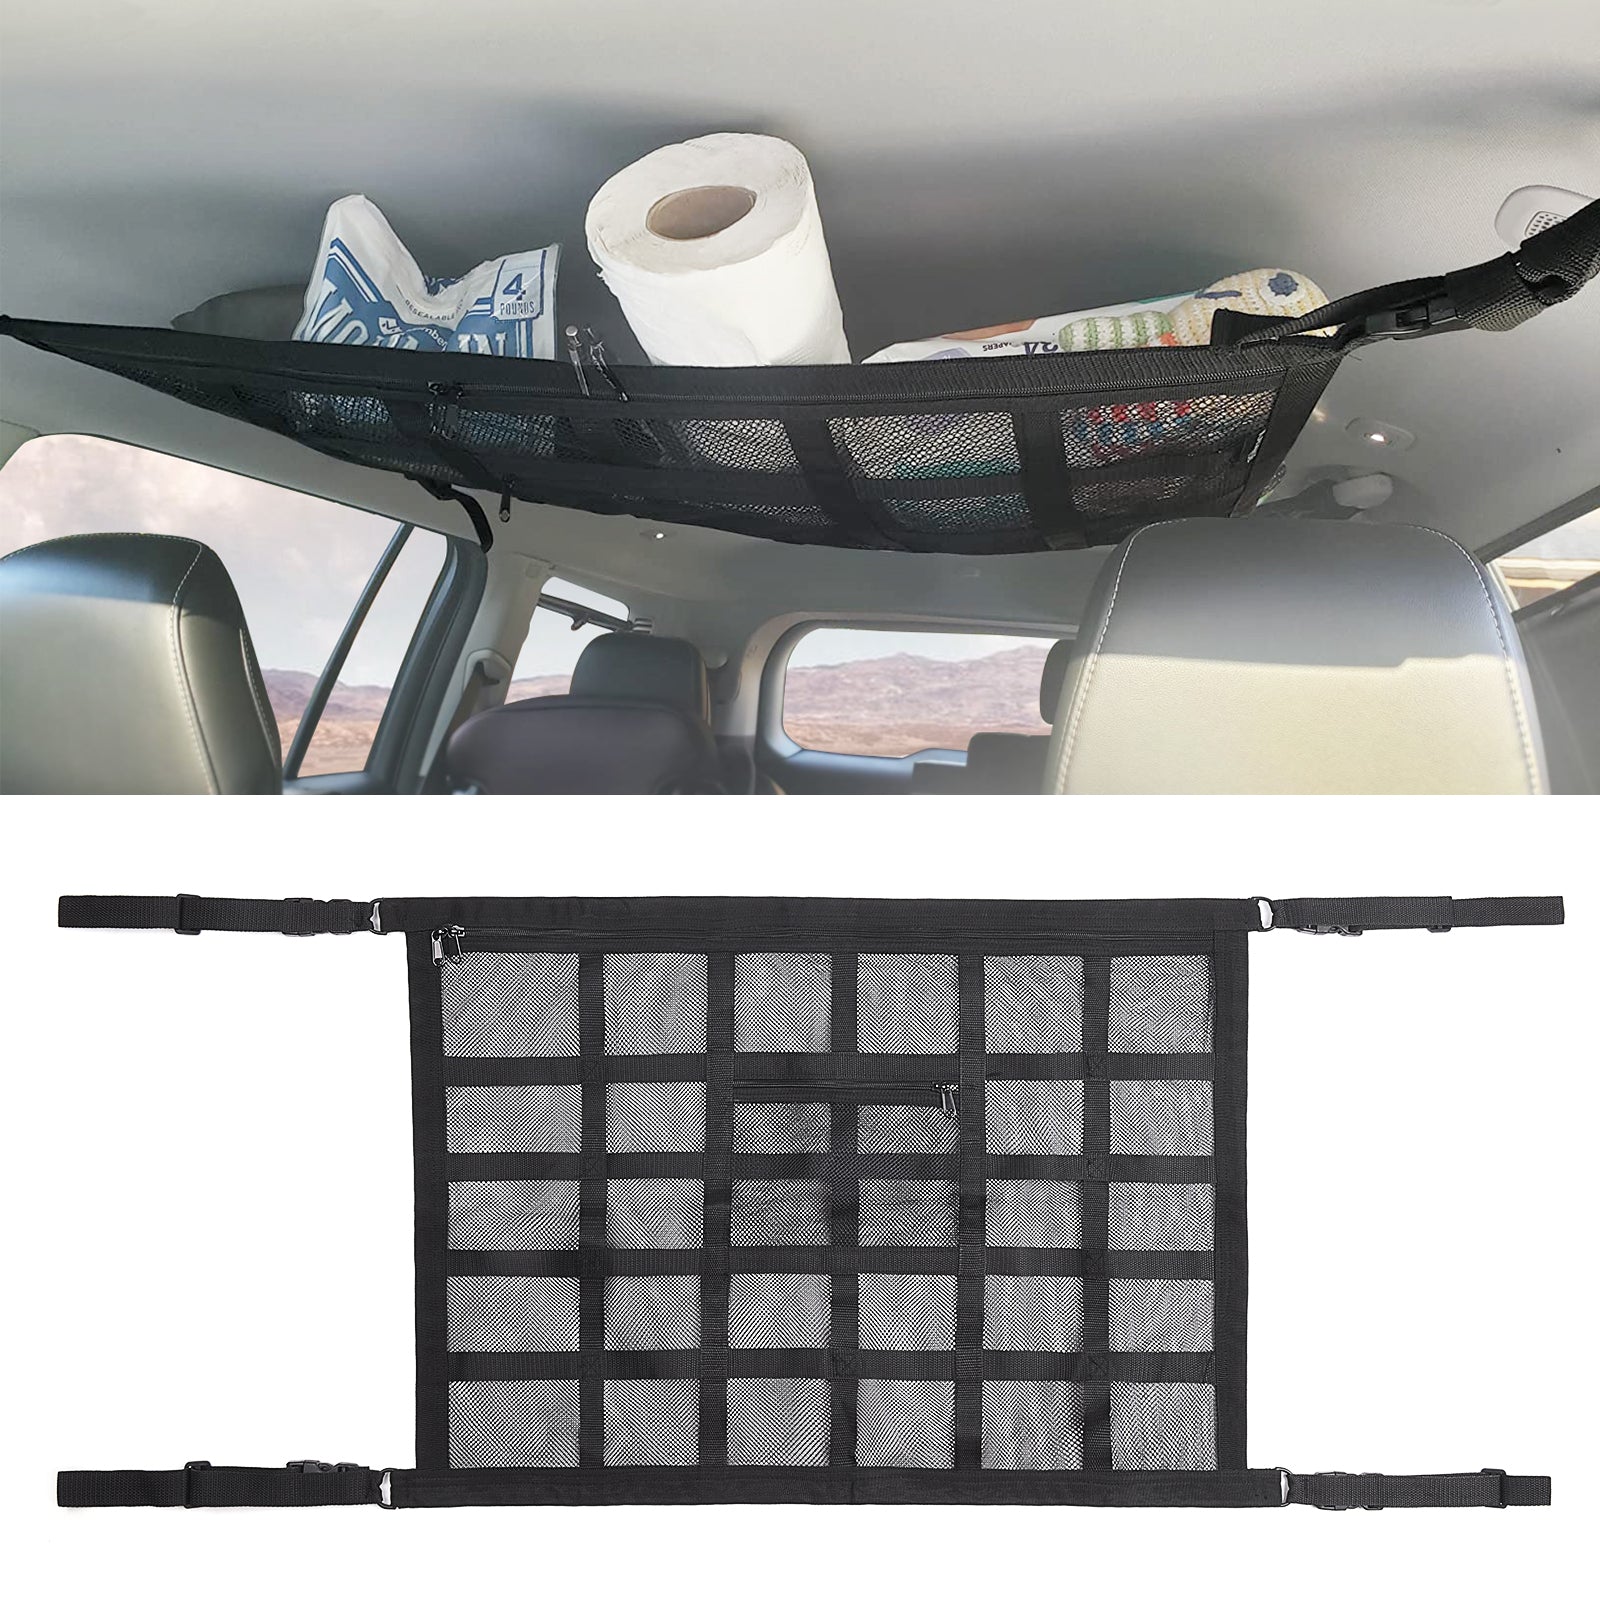 Car Ceiling Cargo Net, 31.5x21.6 Strong Bearing Capacity Roof Cargo